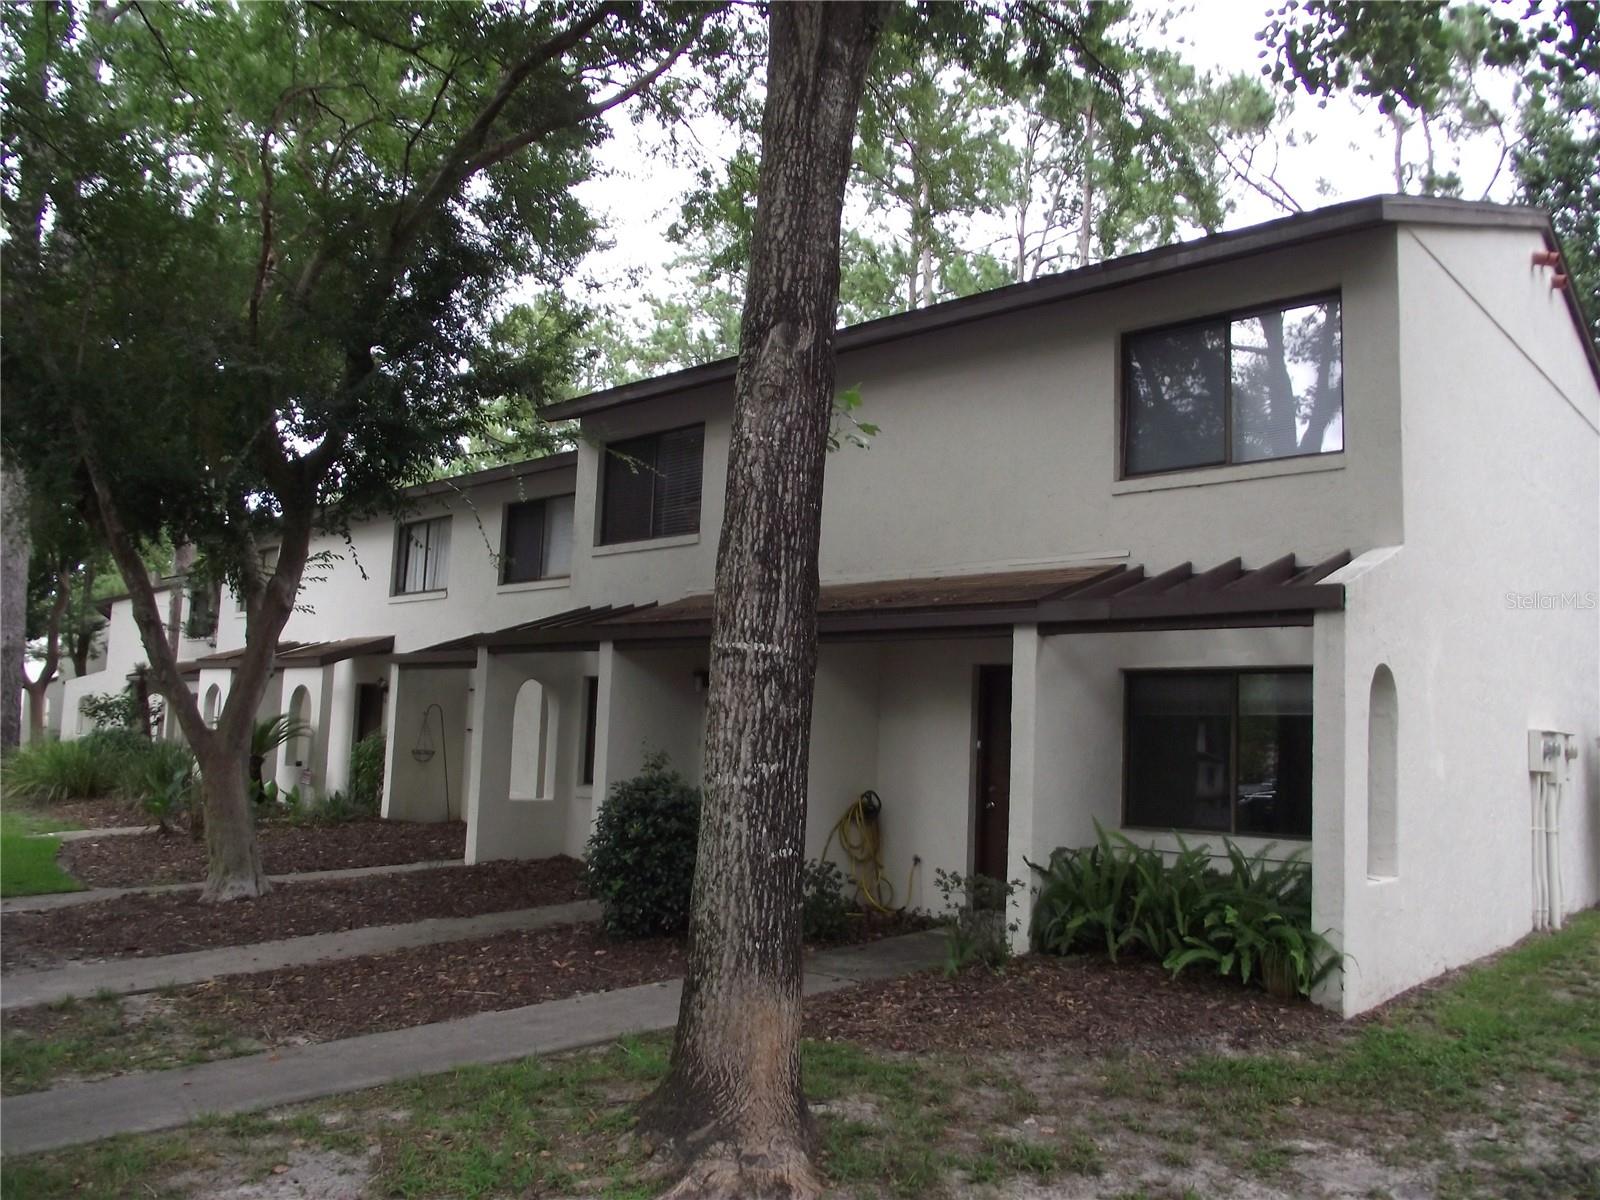 View GAINESVILLE, FL 32608 townhome